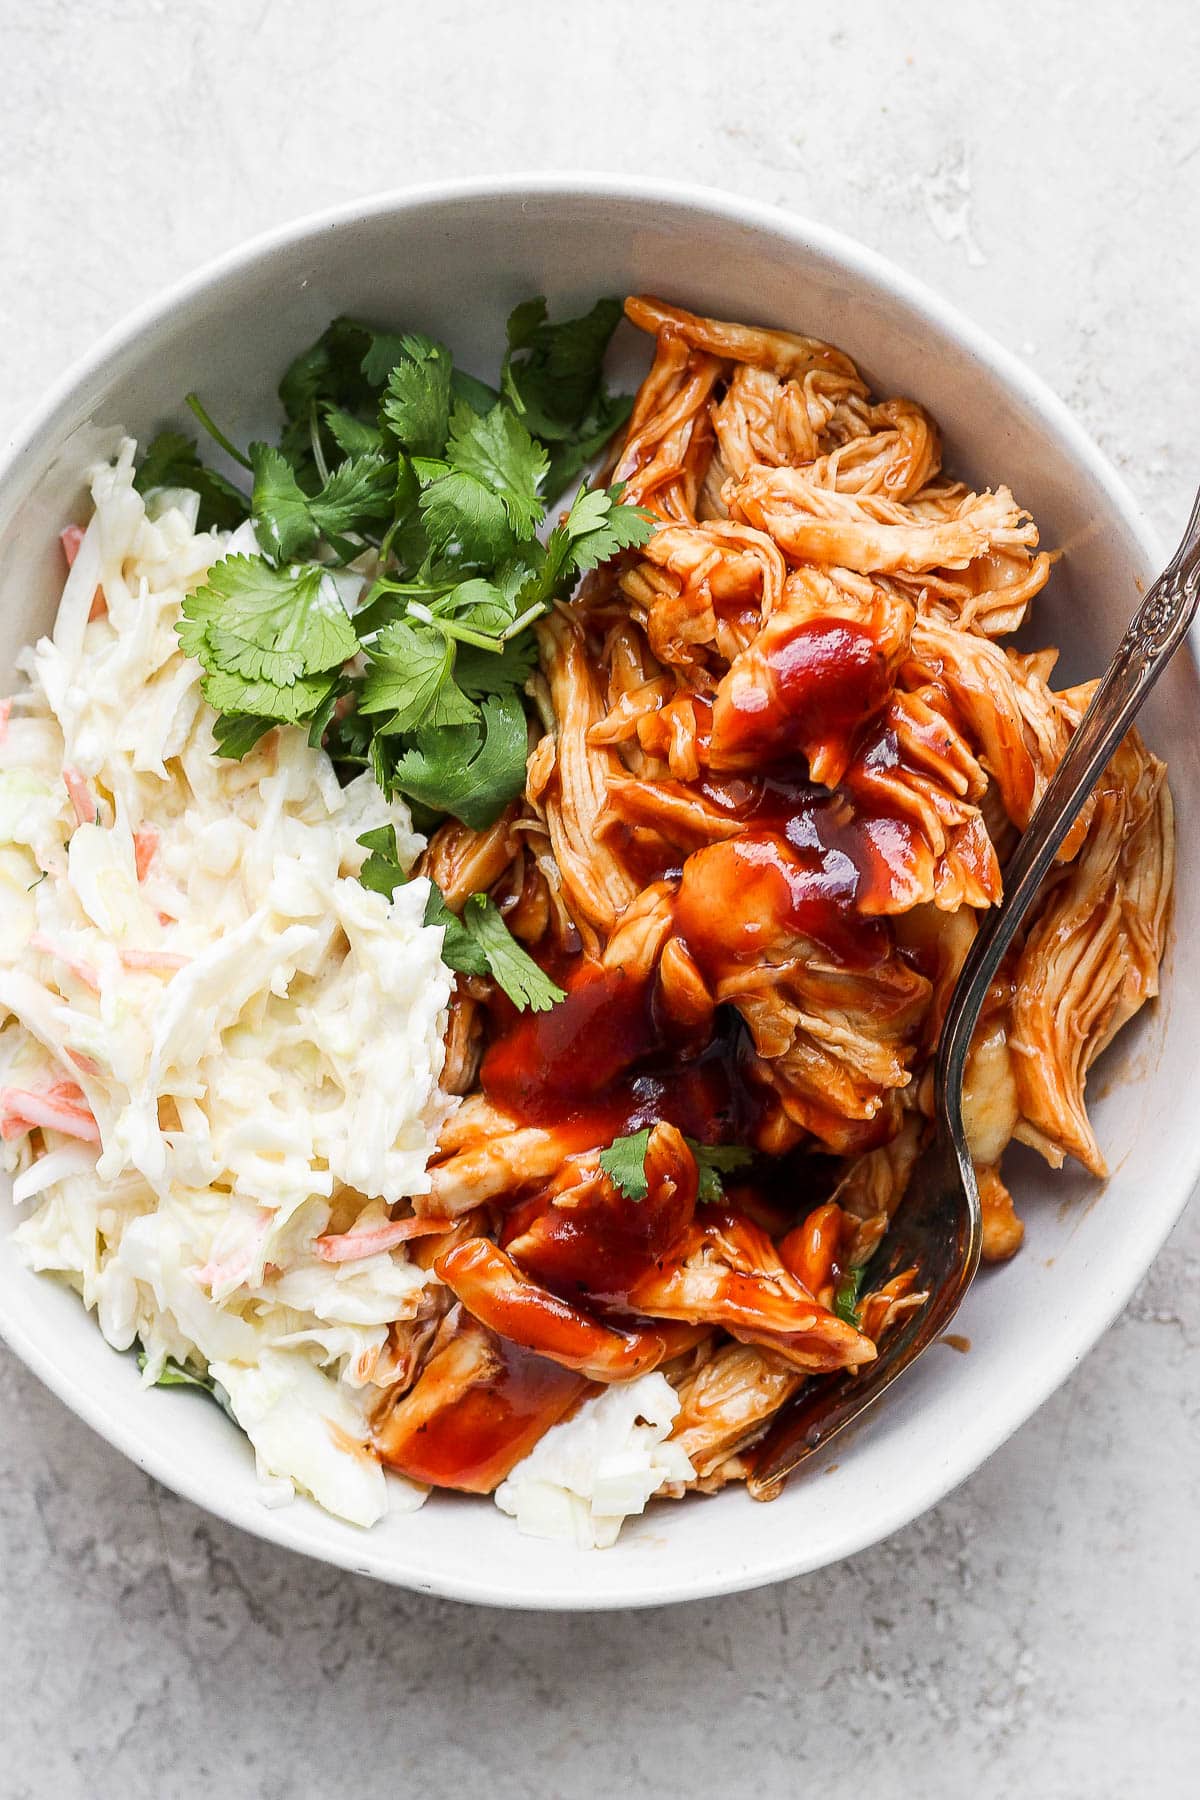 A bowl of creamy coleslaw and BBQ chicken.